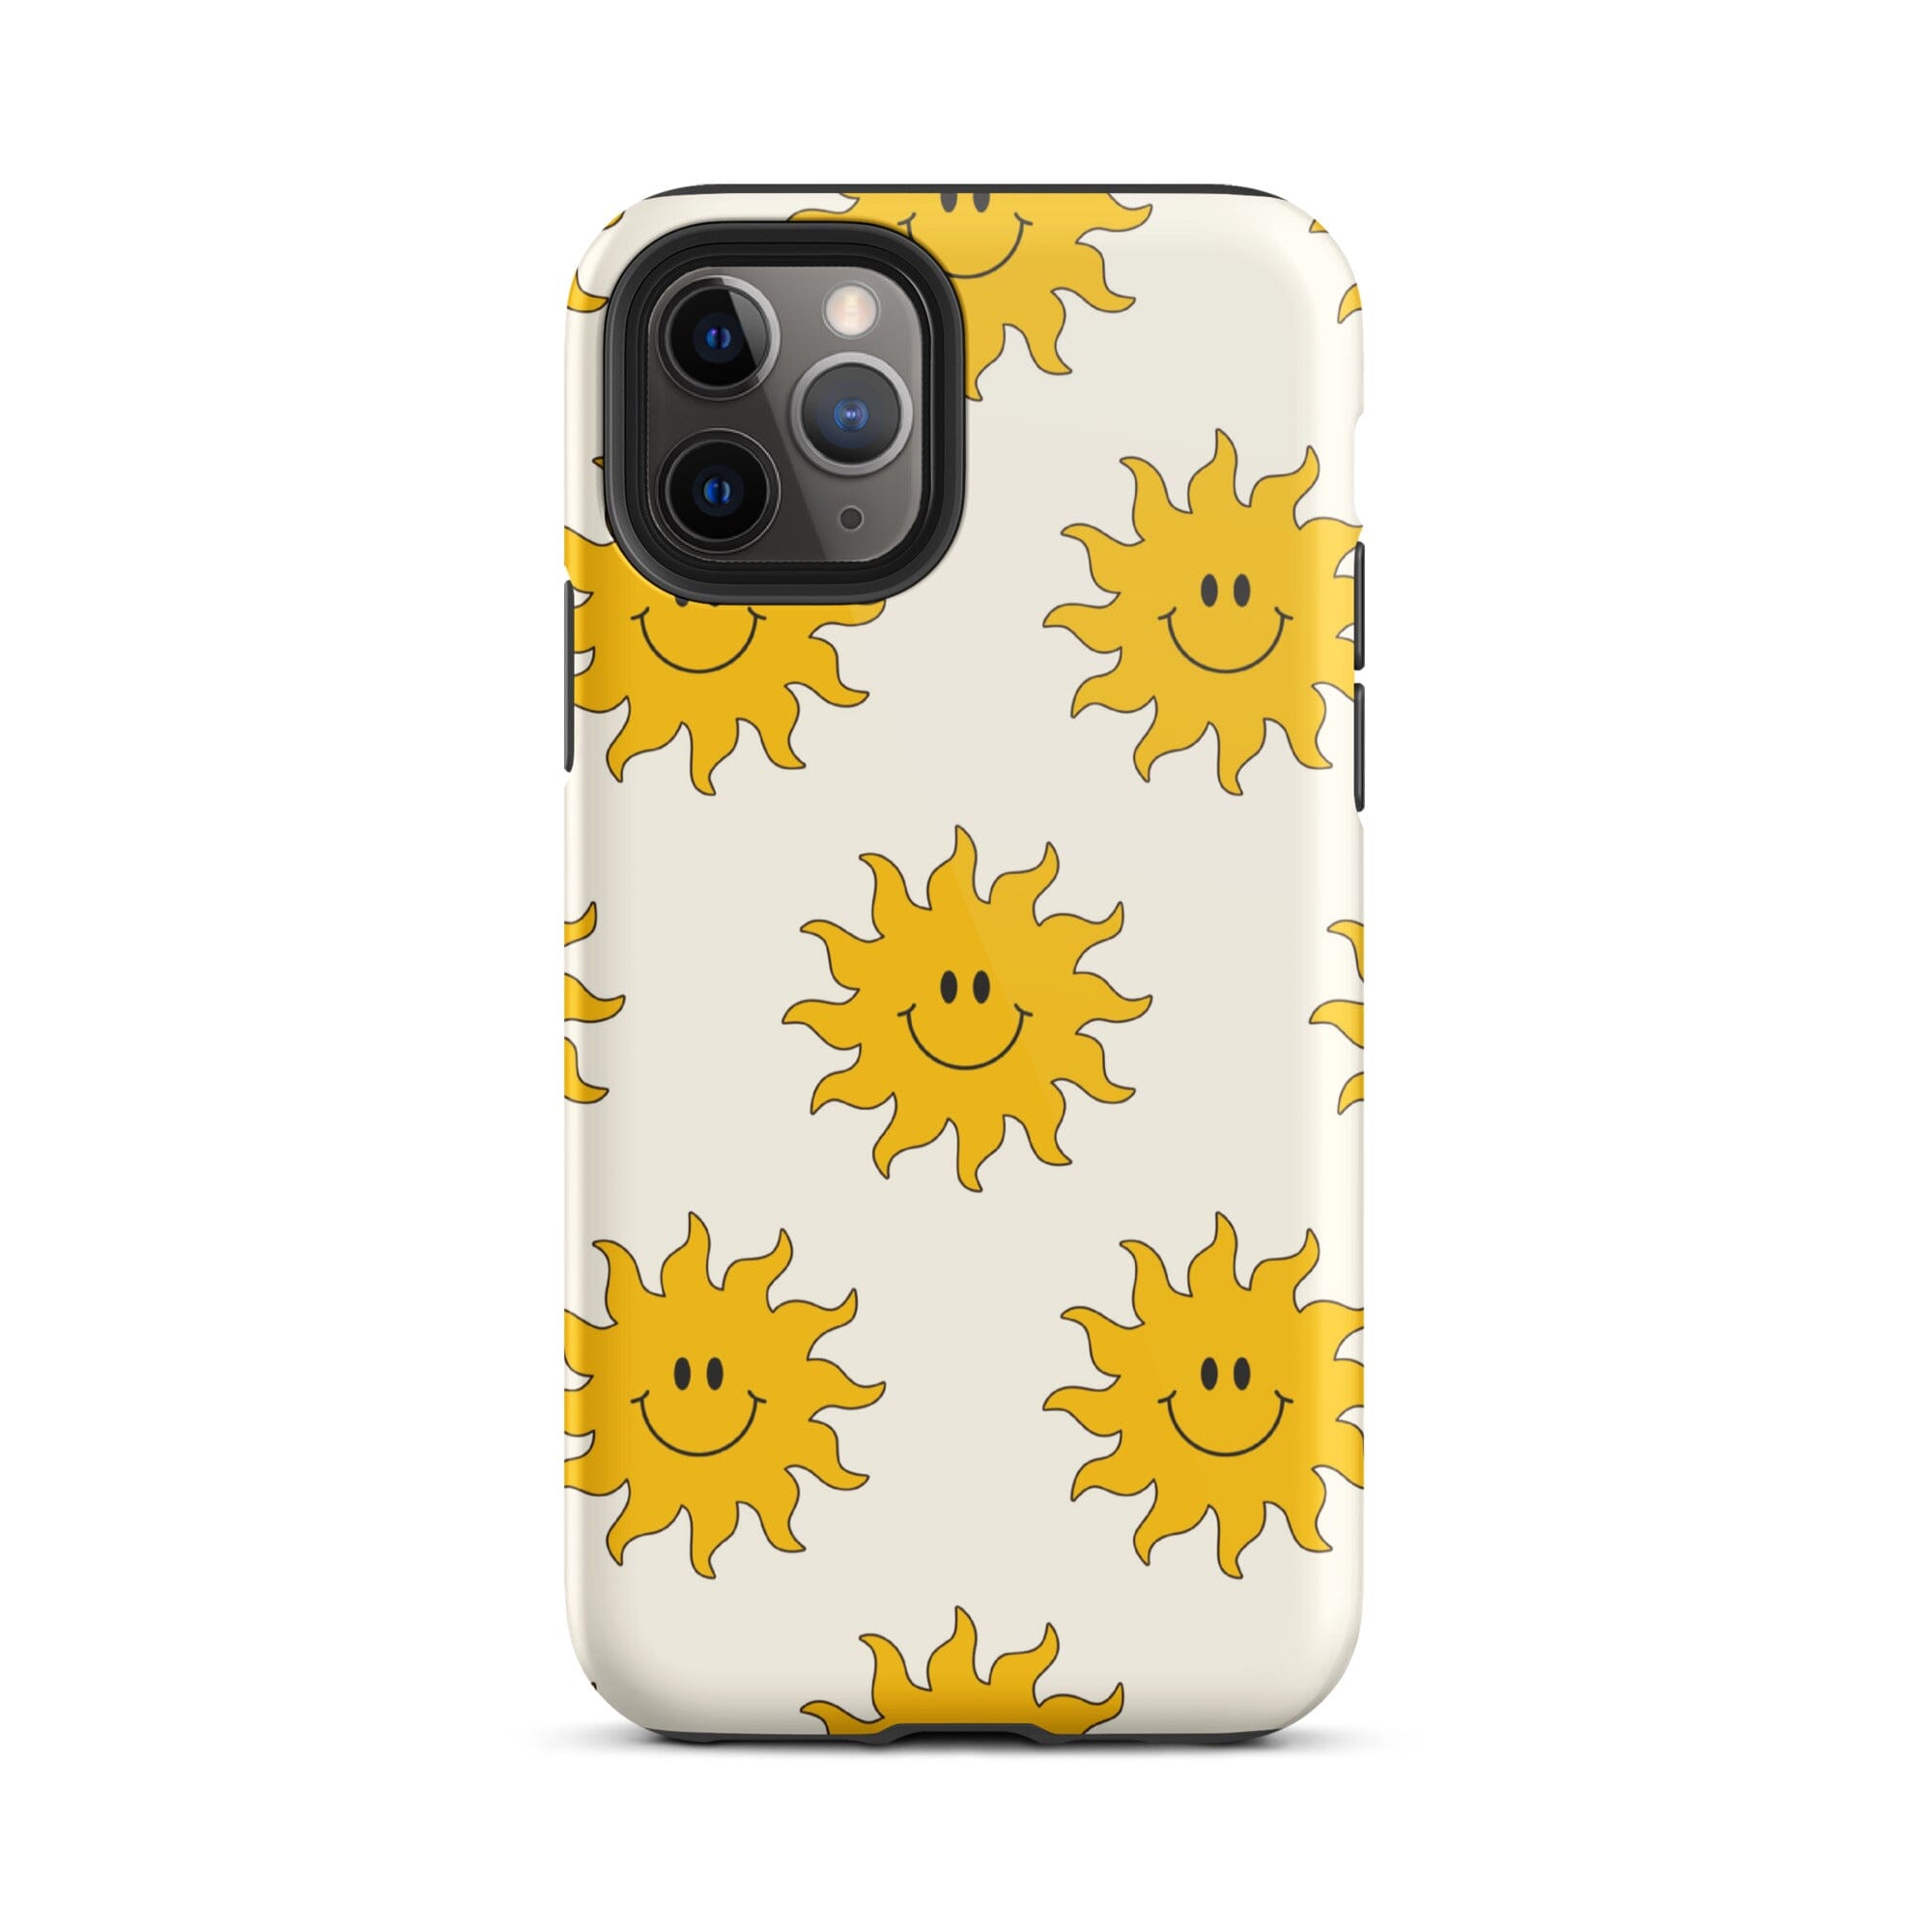 Sunny iPhone Case Knitted Belle Boutique iPhone 11 